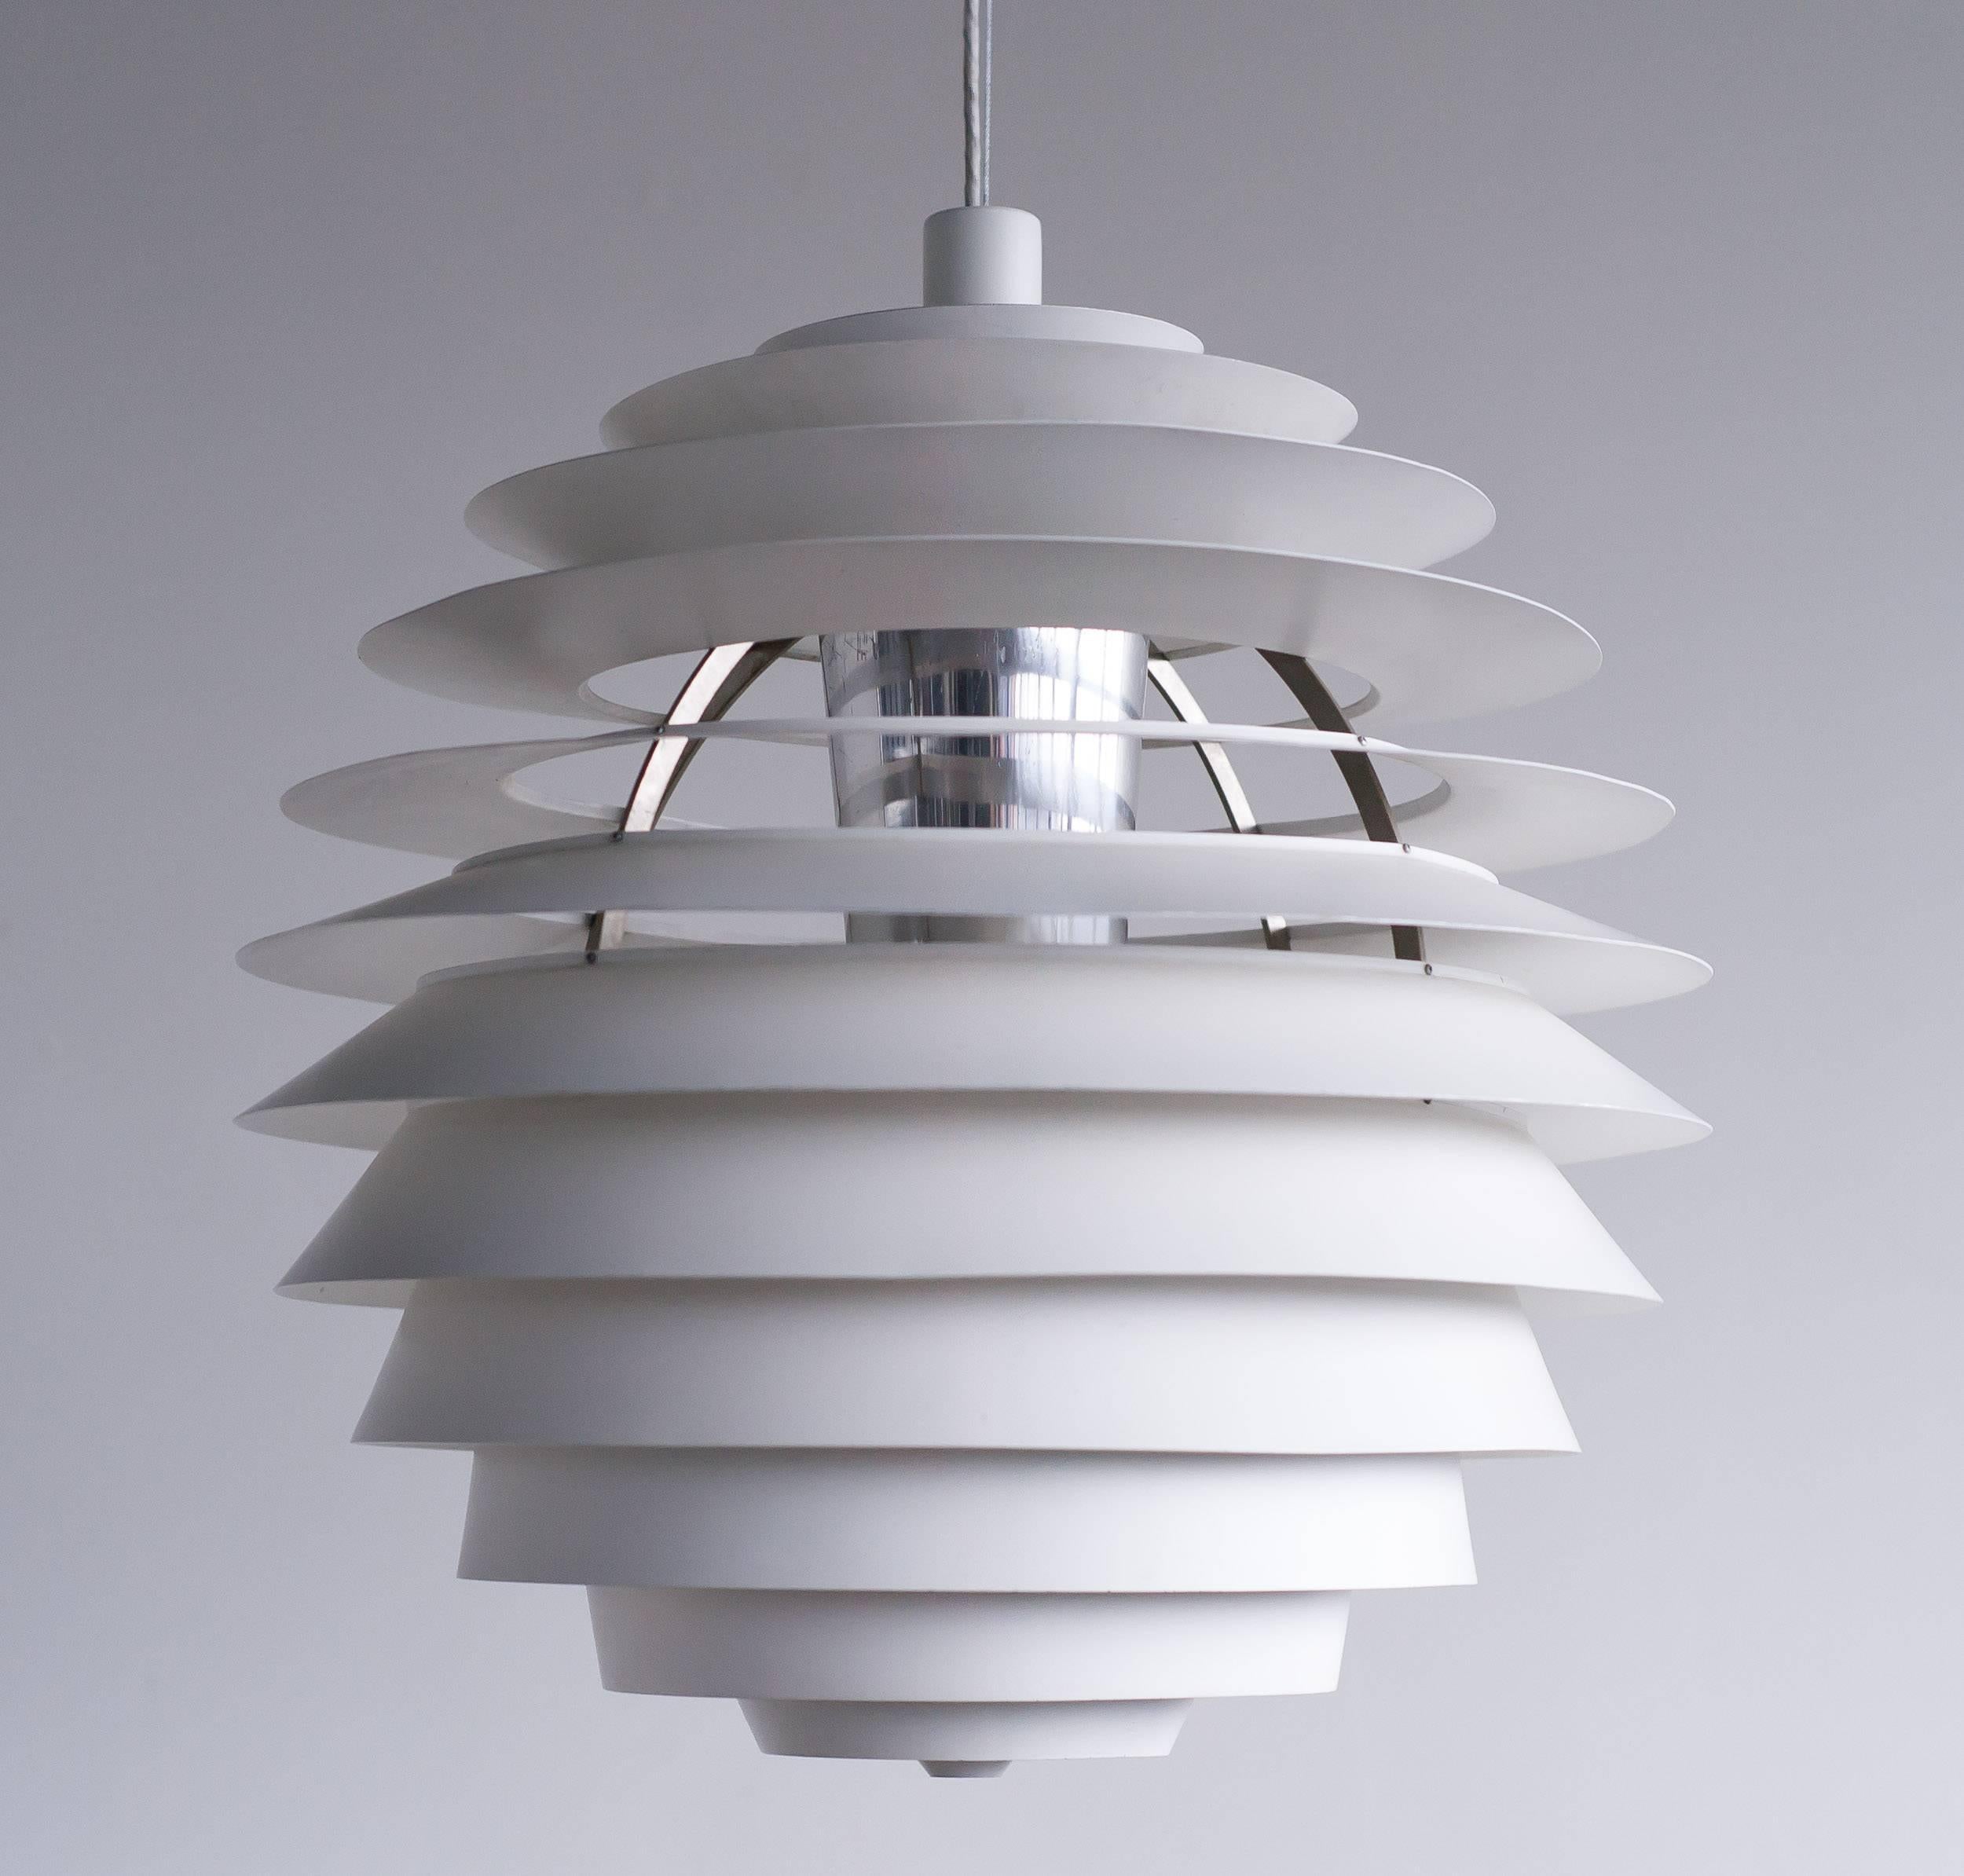 Large pendant by Poul Henningsen for Louis Poulsen, Denmark, 1957.
The matte white lacquered shades provide a pleasant diffused light.
Early (period) lamp.

Excellent fast and affordable worldwide shipping.
White glove delivery available upon